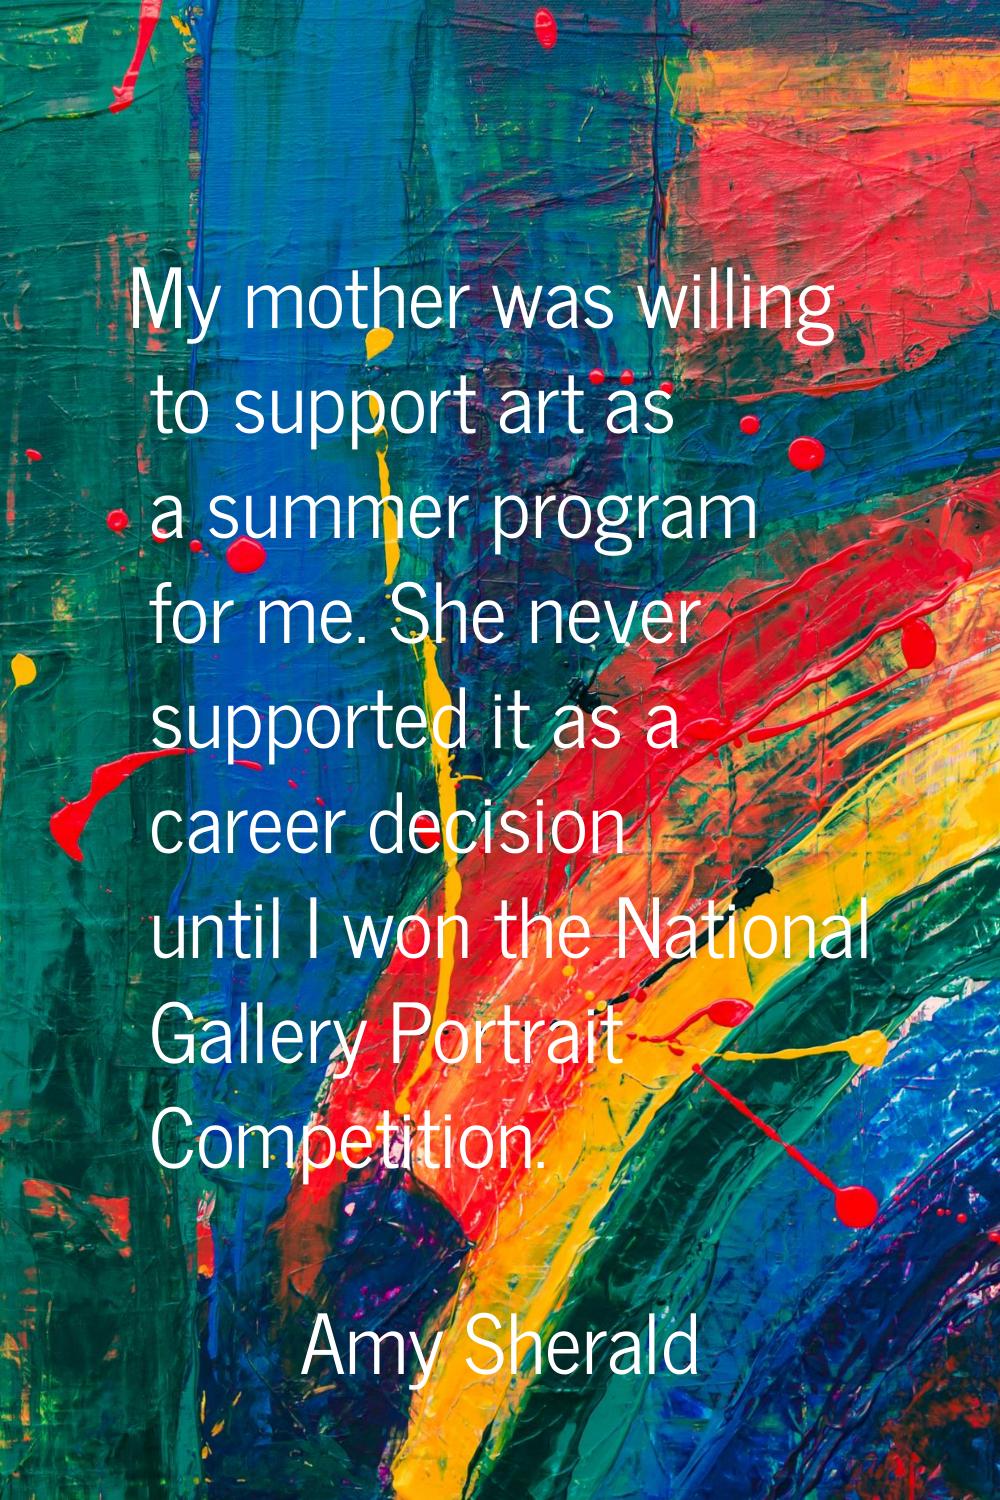 My mother was willing to support art as a summer program for me. She never supported it as a career